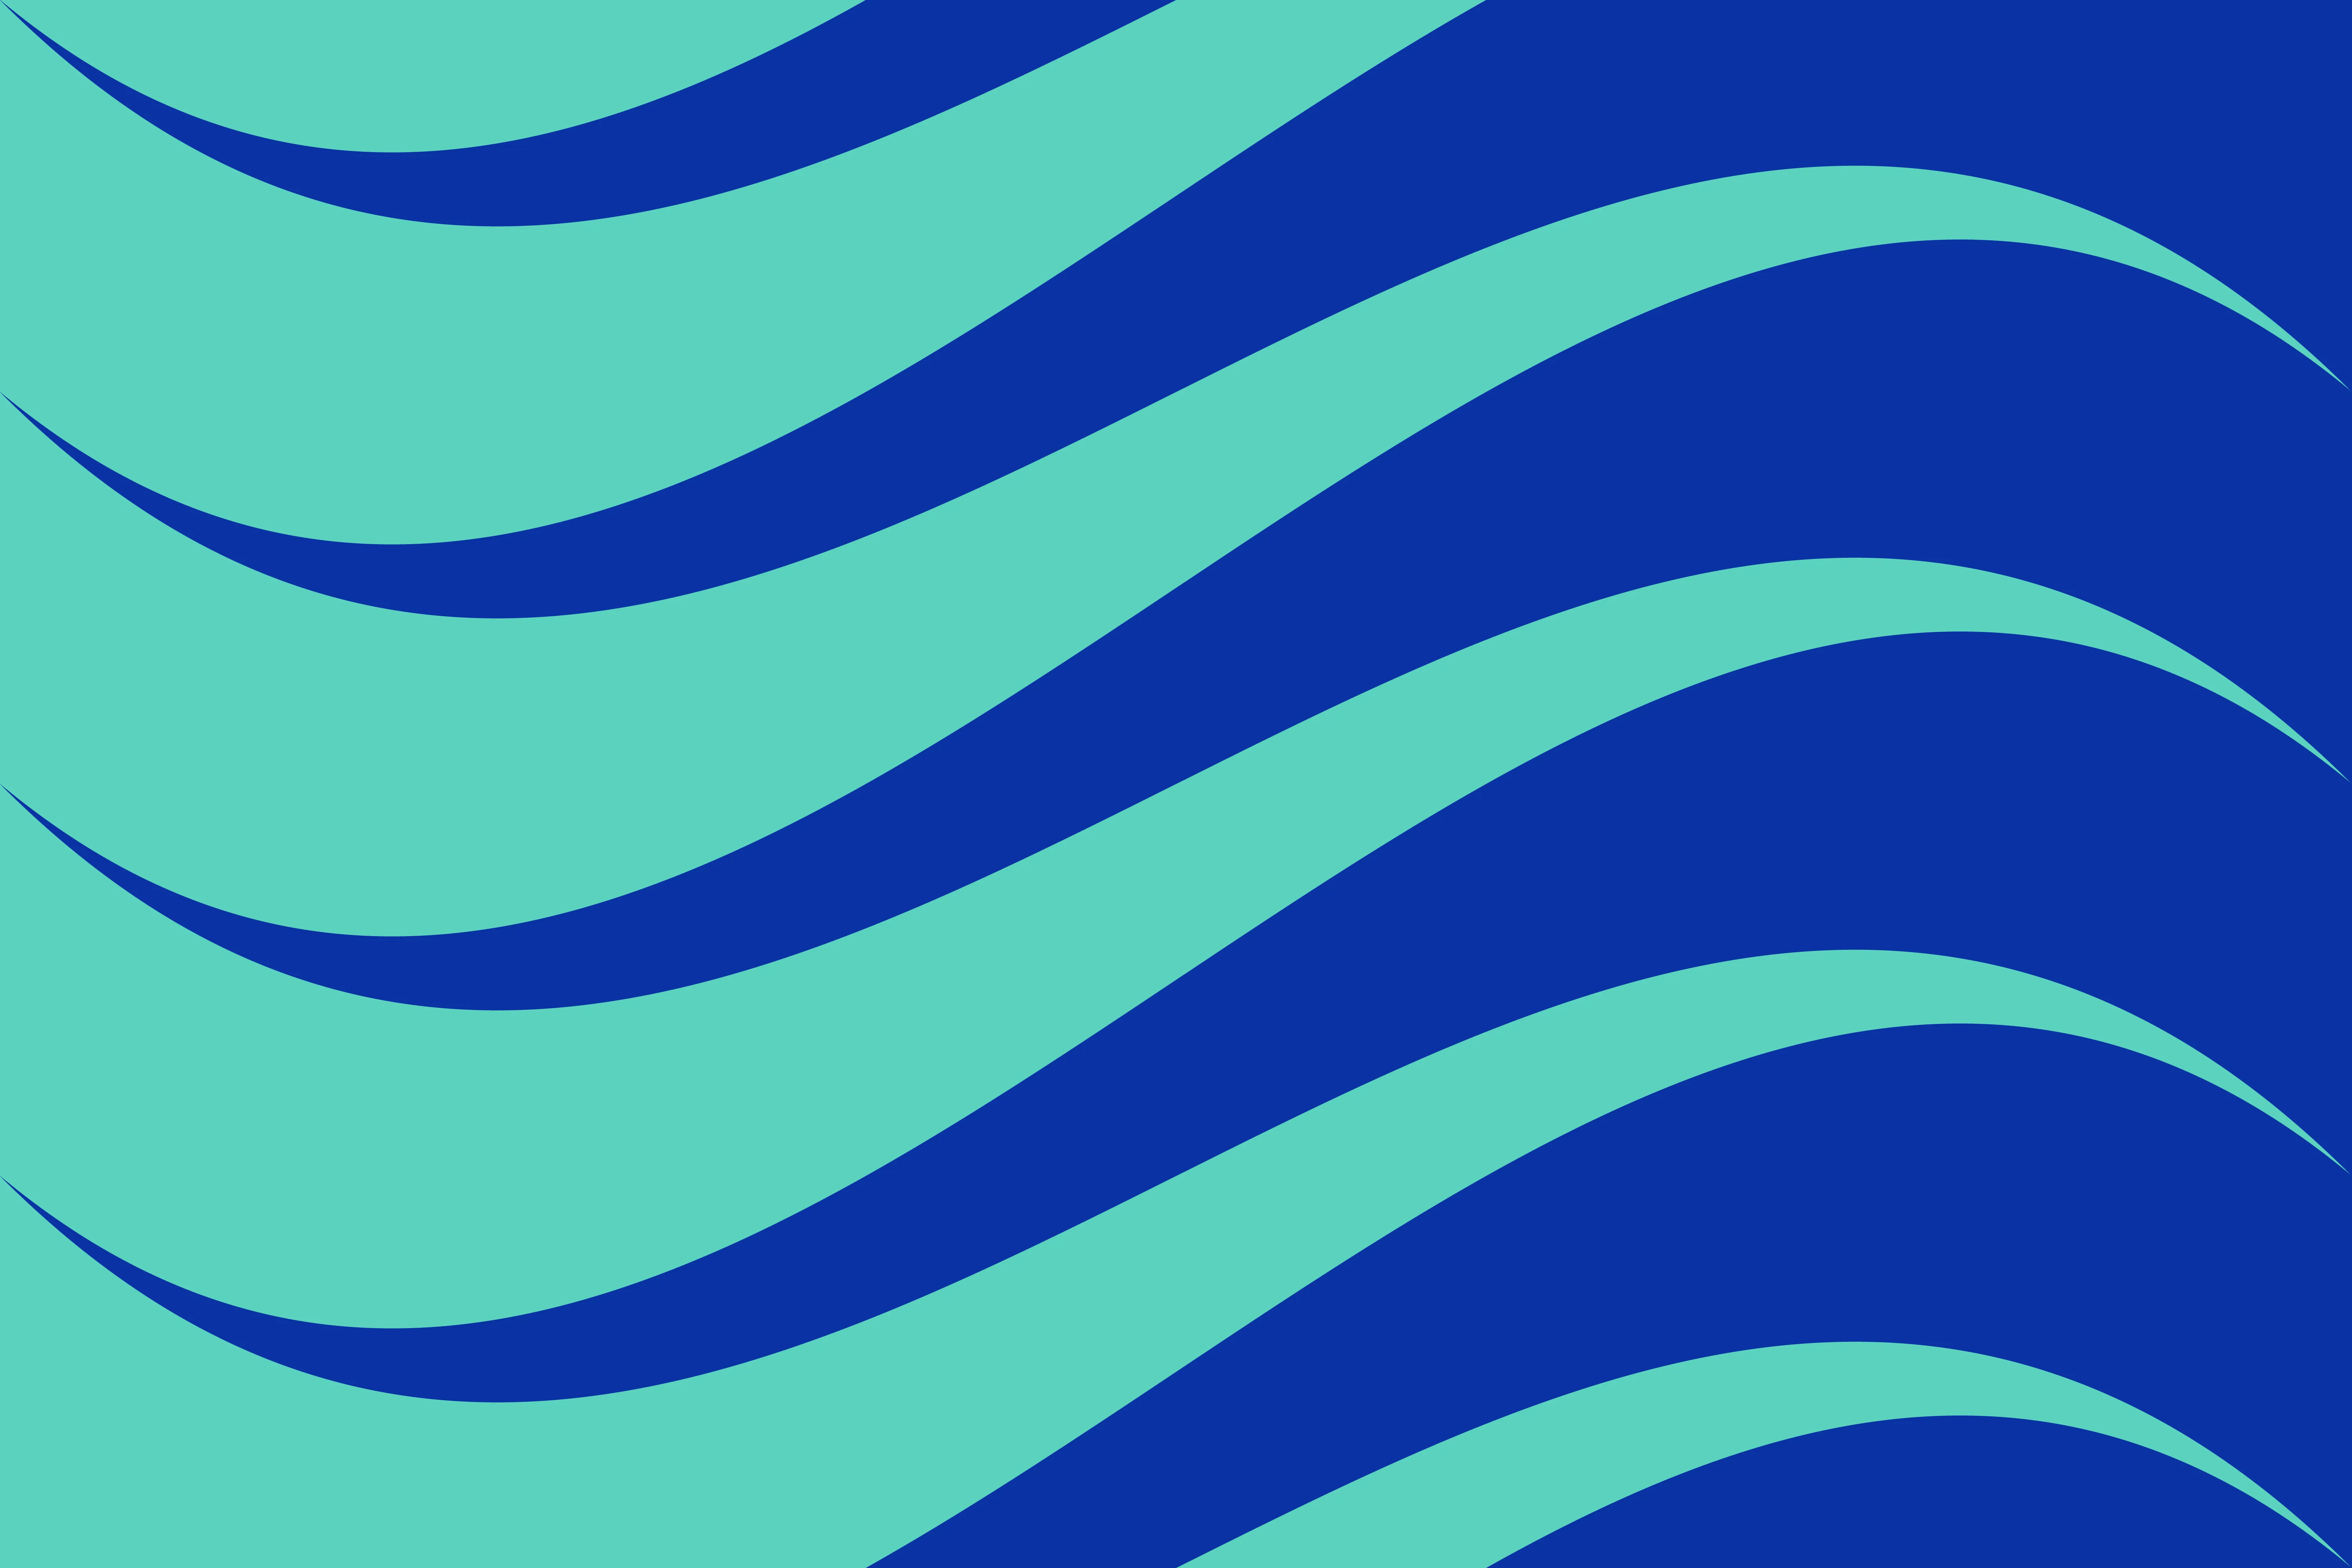 A flag is seagreen and ultramarine blue waves.